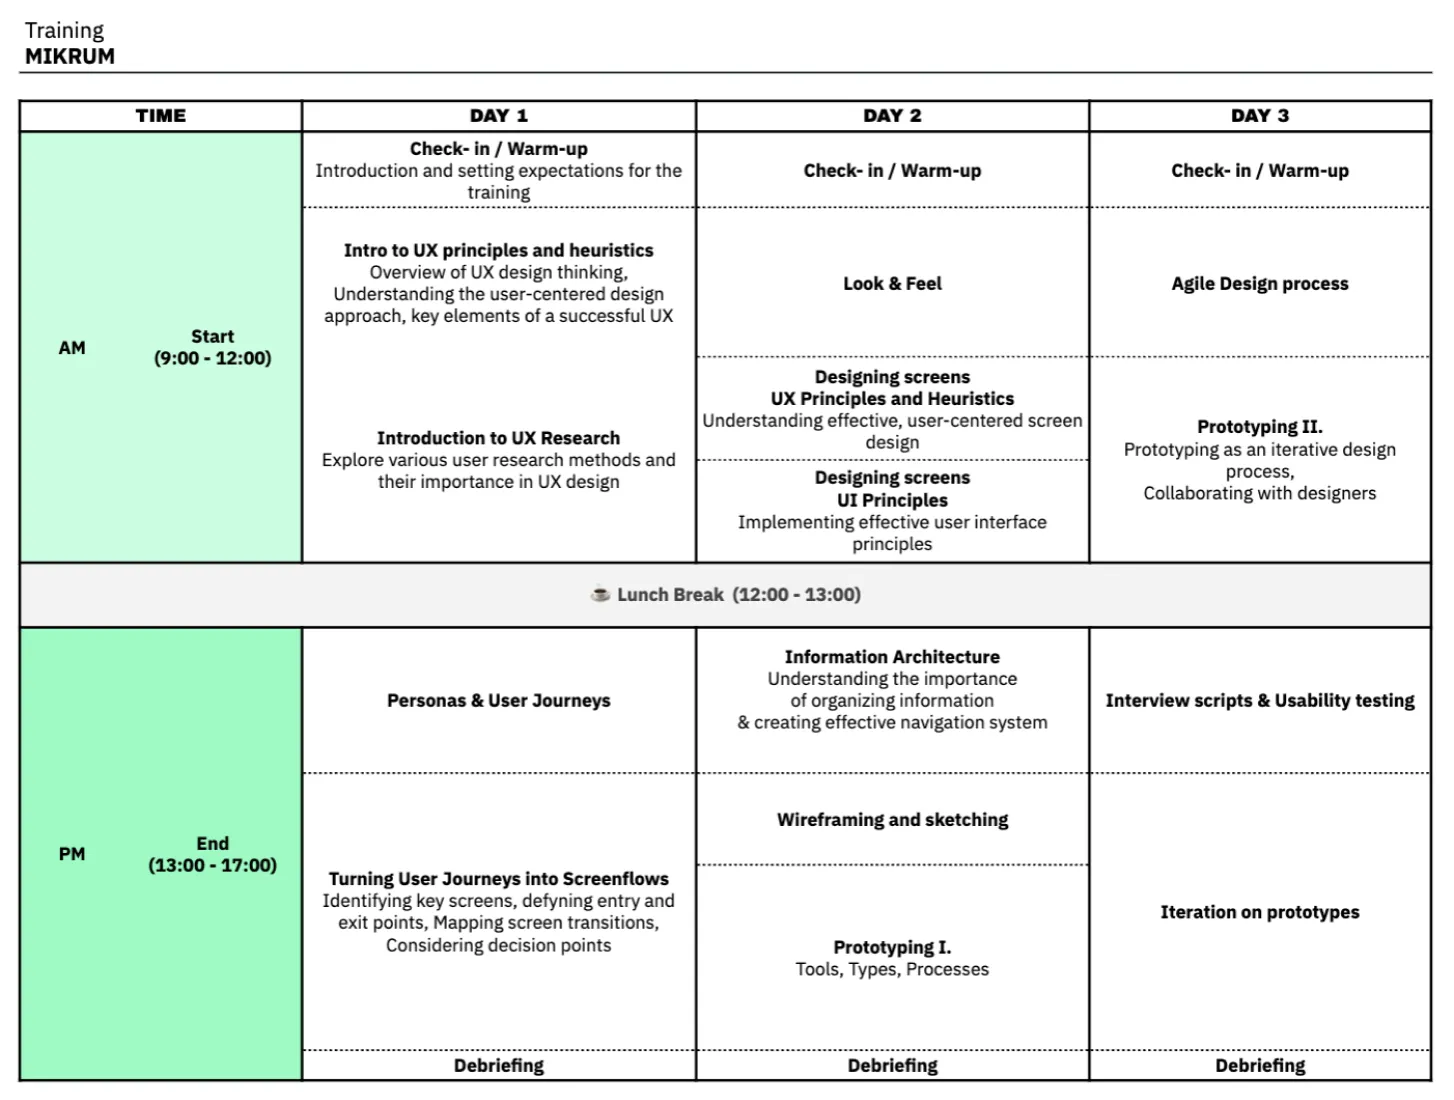 The UX training schedule for the three day broken down by topics.